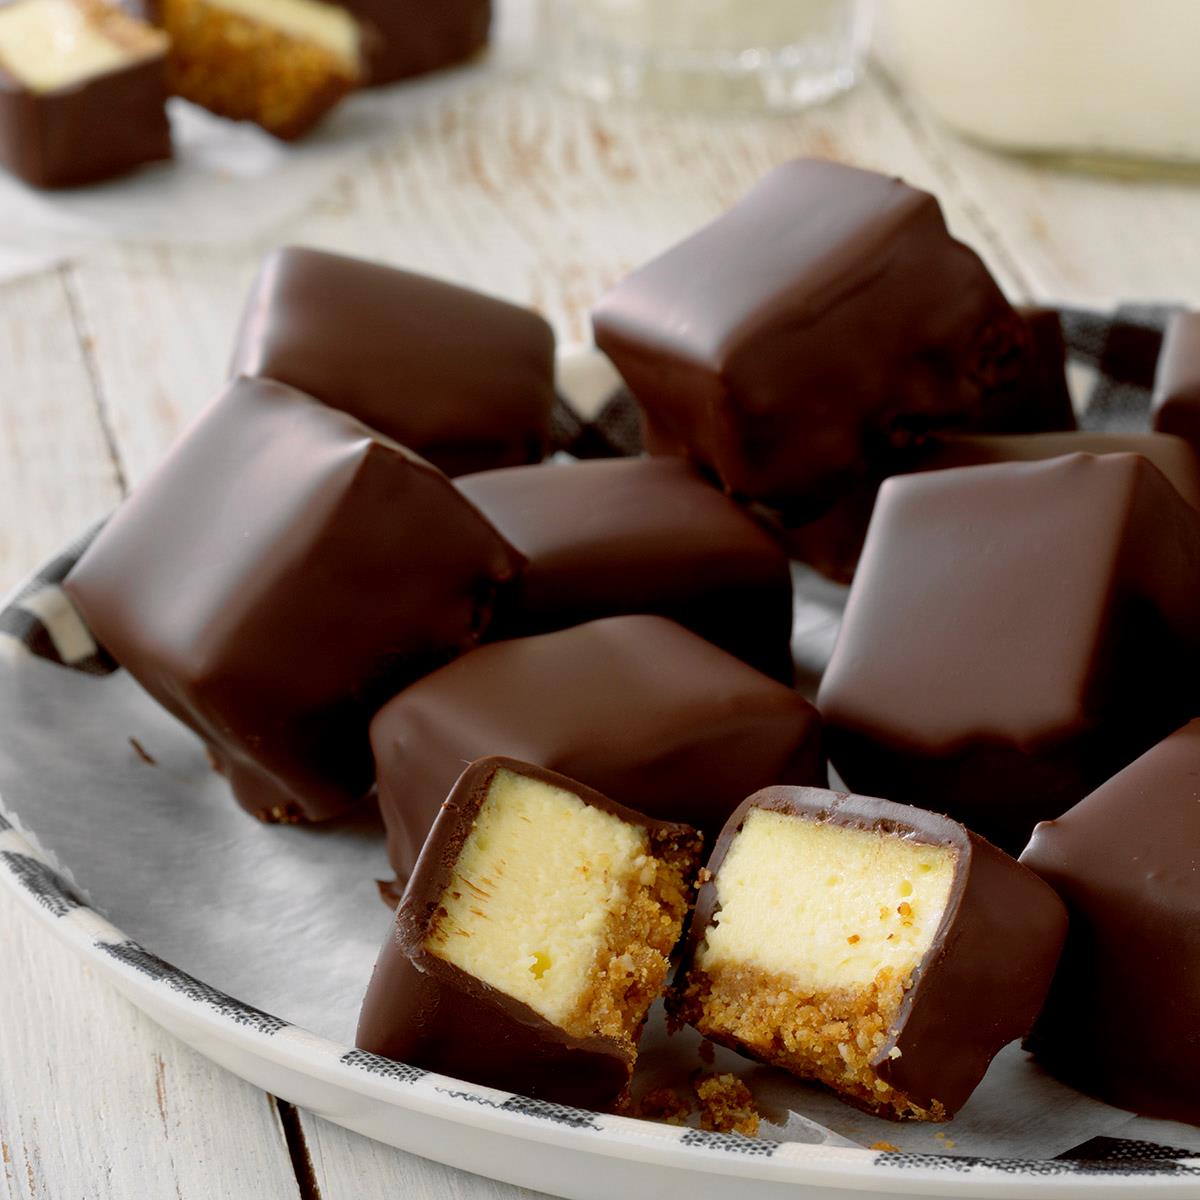 Chocolate-Covered Cheesecake Squares Recipe: How to Make It